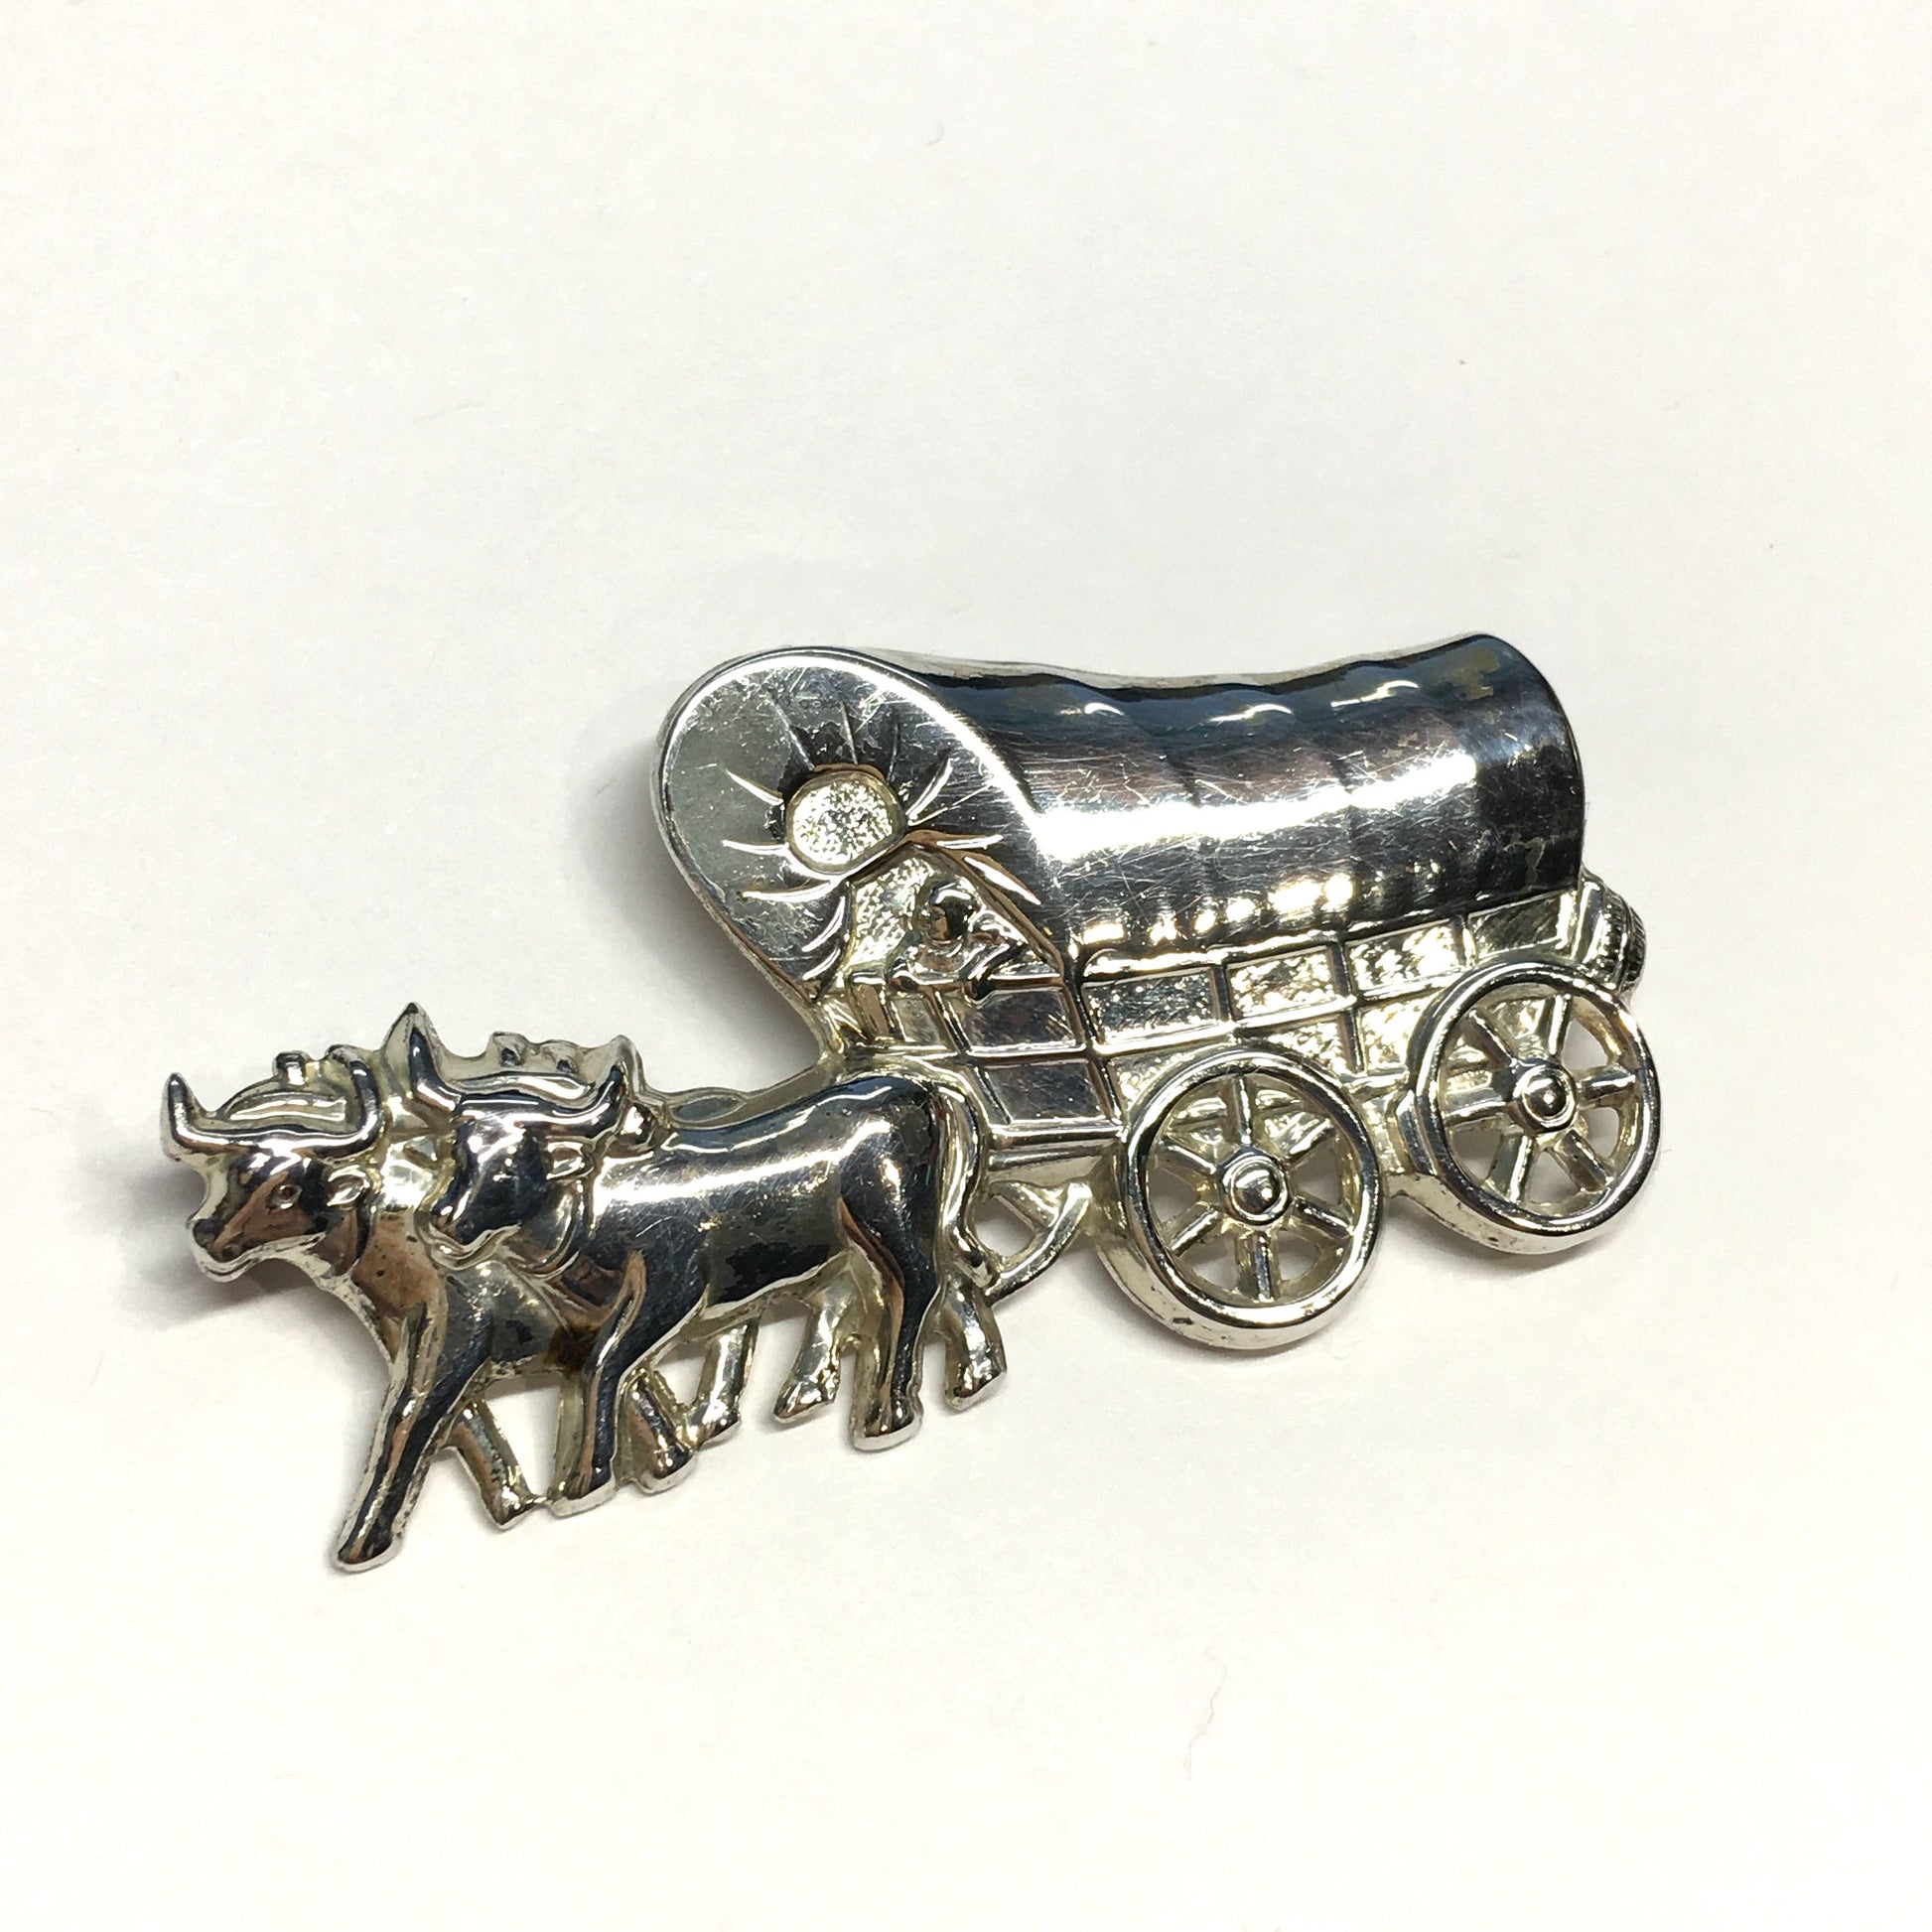 Brooches & Lapel Pins - Sterling Silver Oxen & Covered Wagon Brooch - Western Style Jacket Pin - Vintage Jewelry online